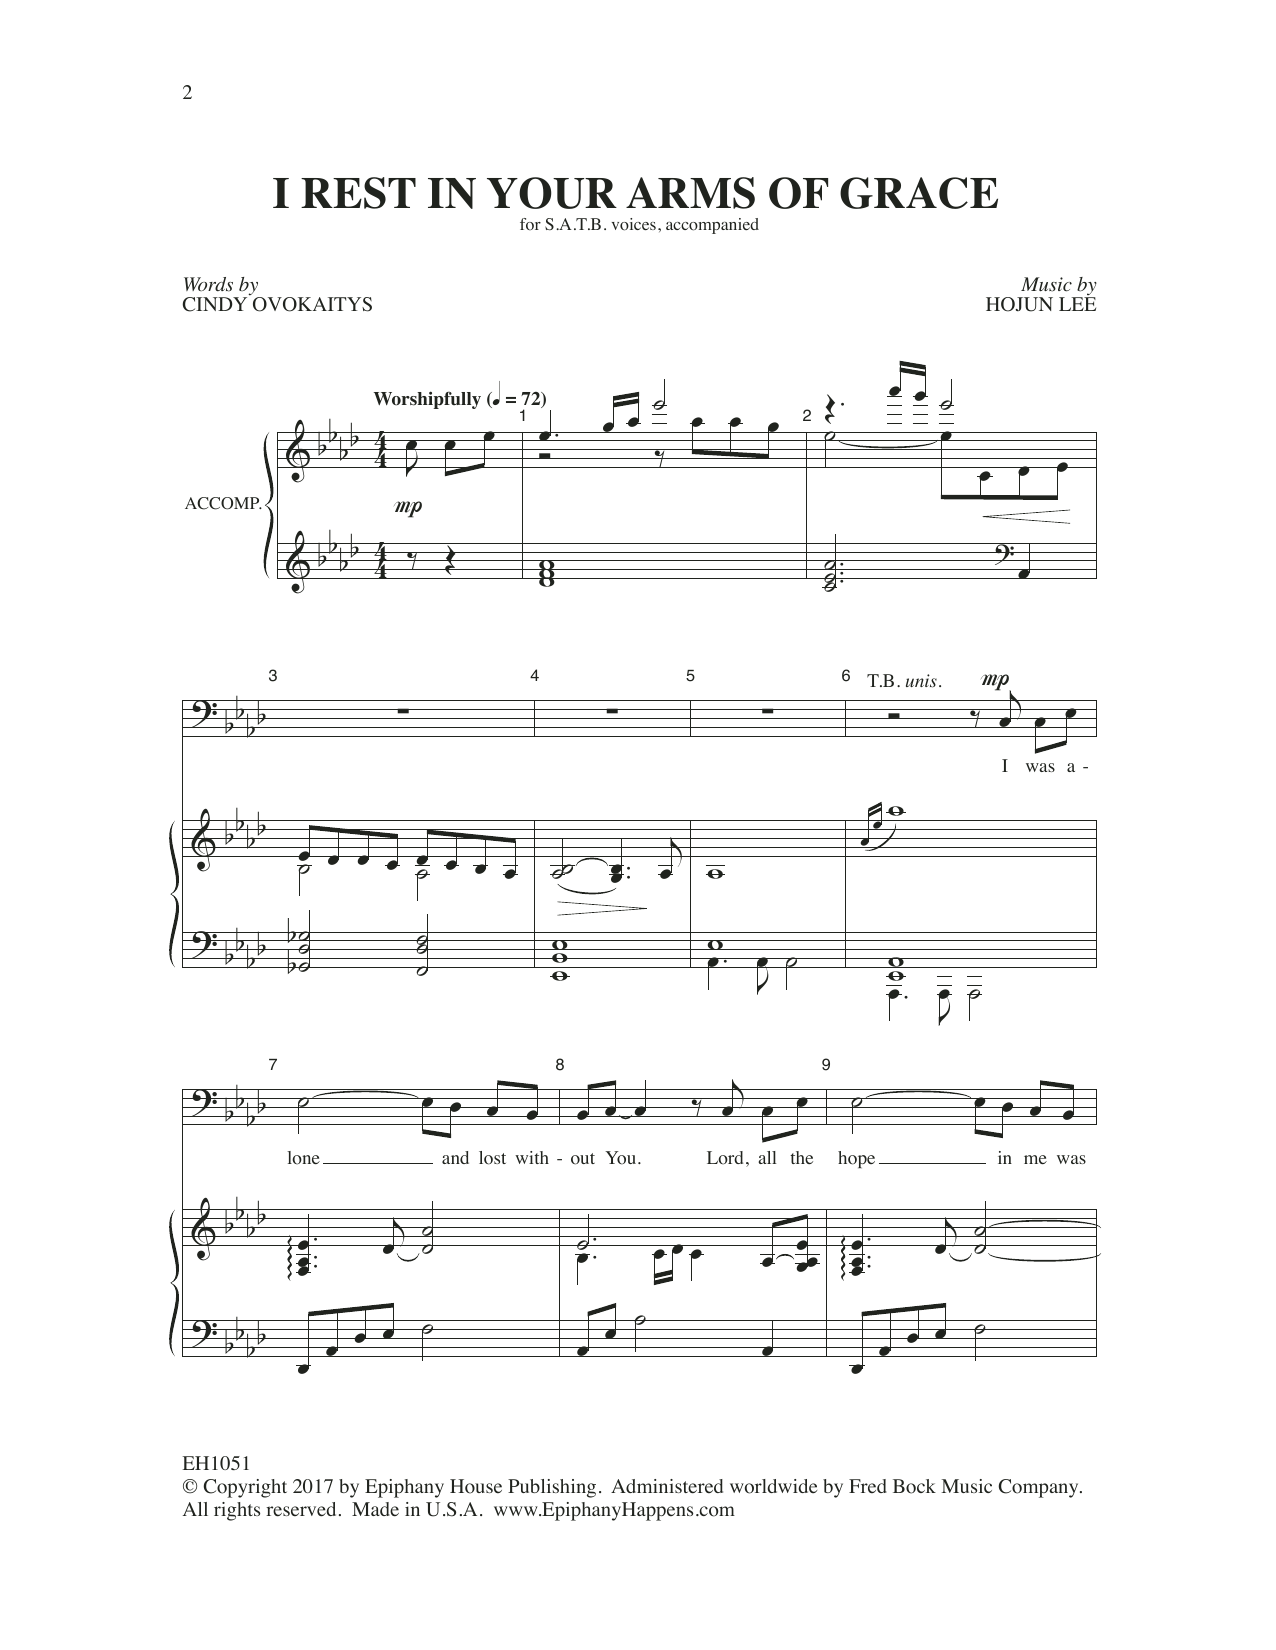 Download Hojun Lee I Rest in Your Arms of Grace Sheet Music